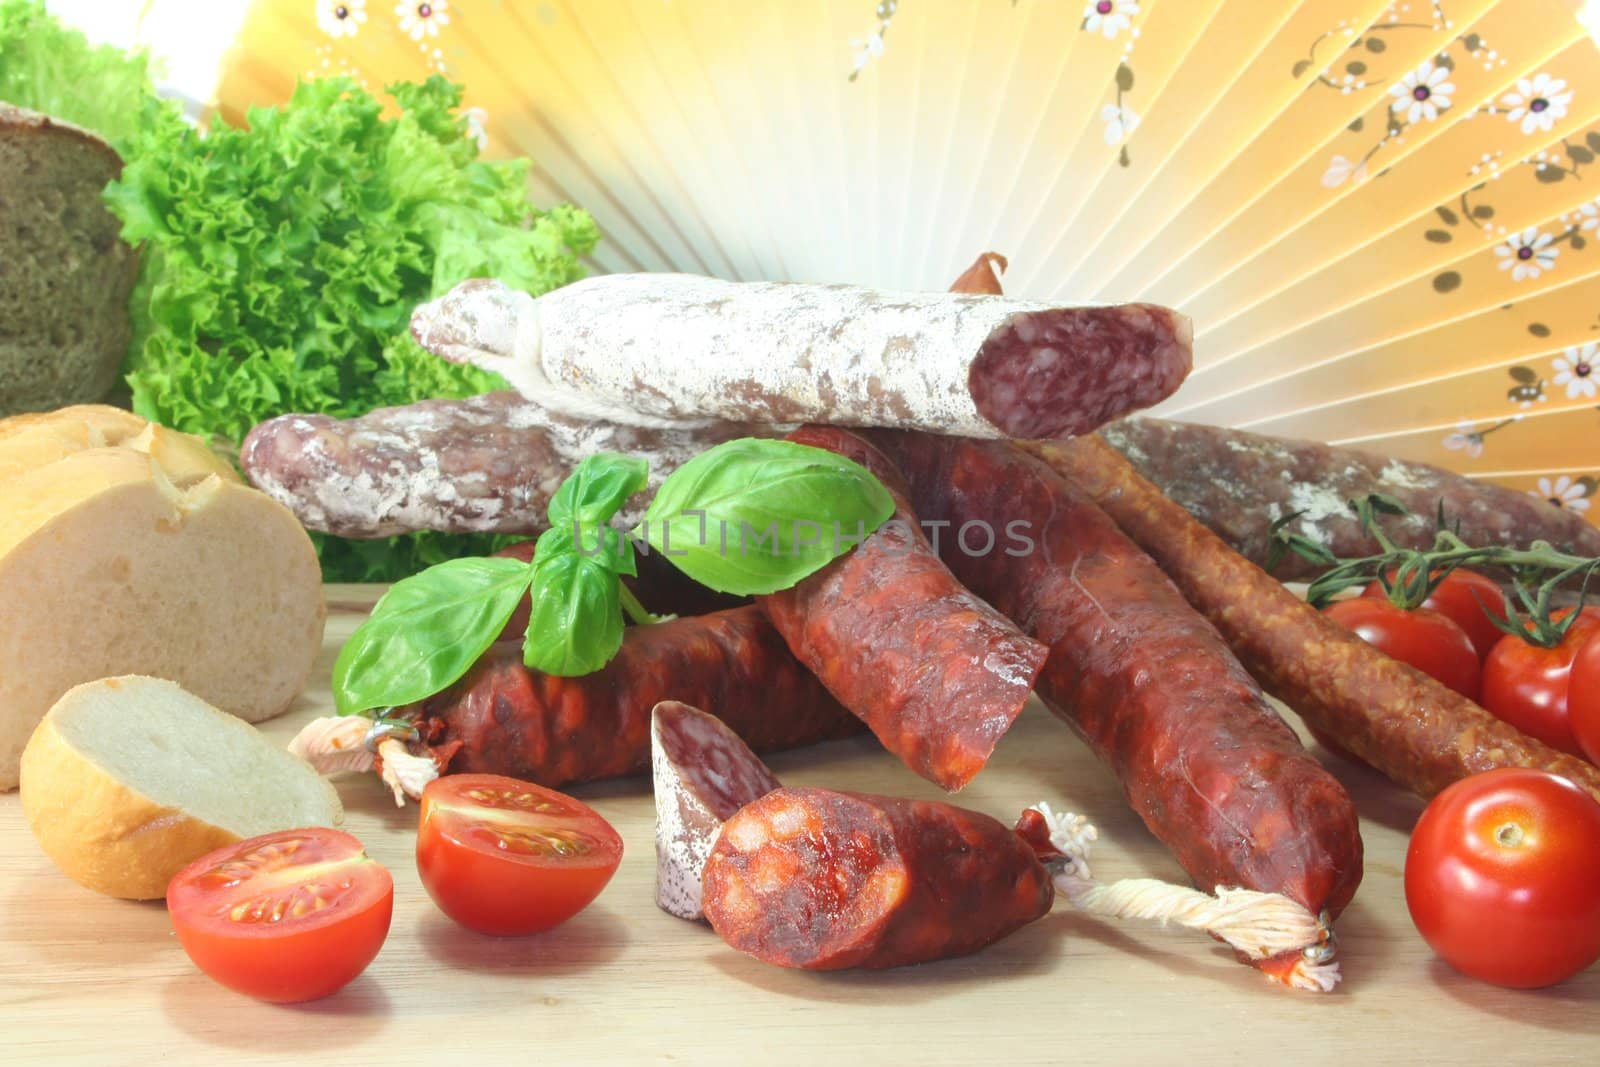 Spanish air-dried salami with vegetables and herbs